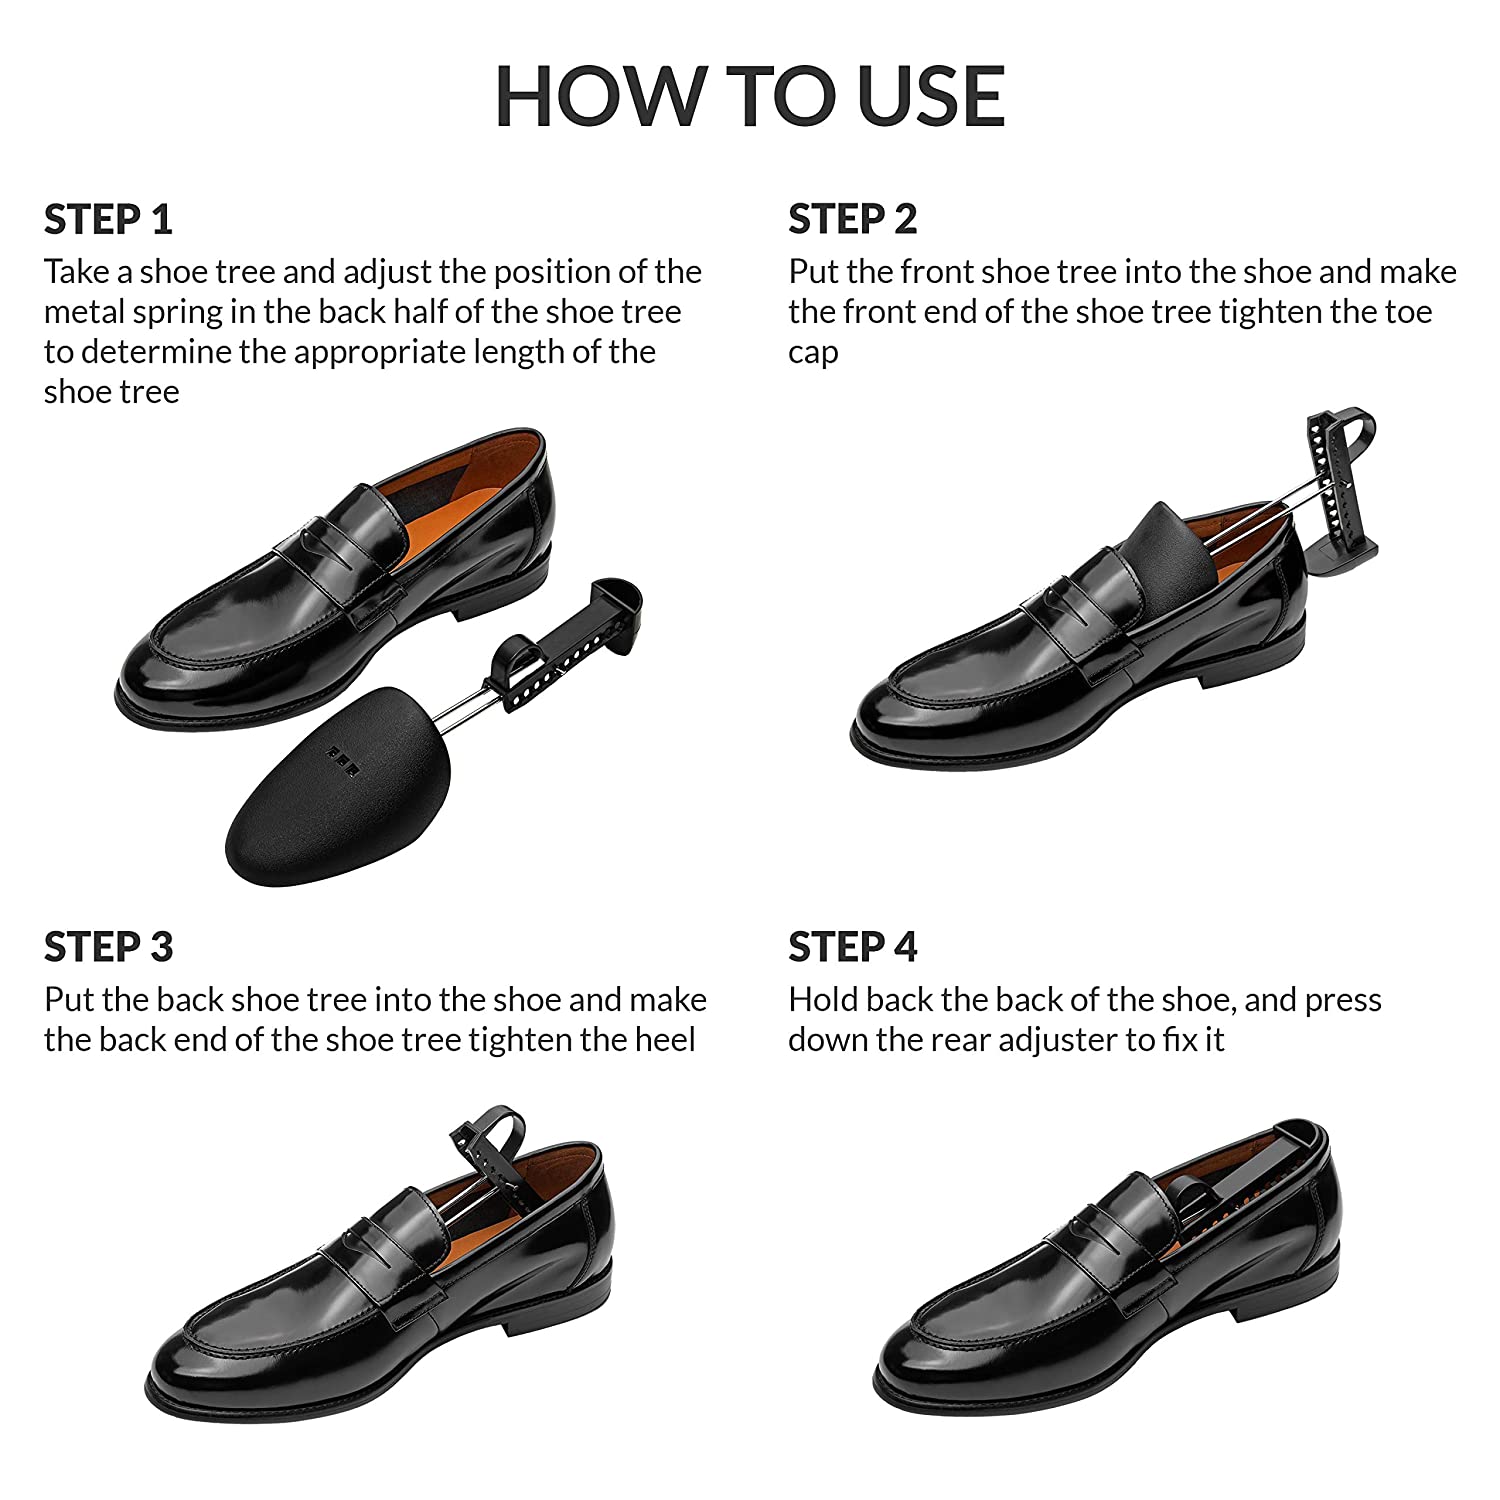 How To Get Rid Of Creases In Shoes: 6 Ways For Synthetic Shoes To Suede Shoes